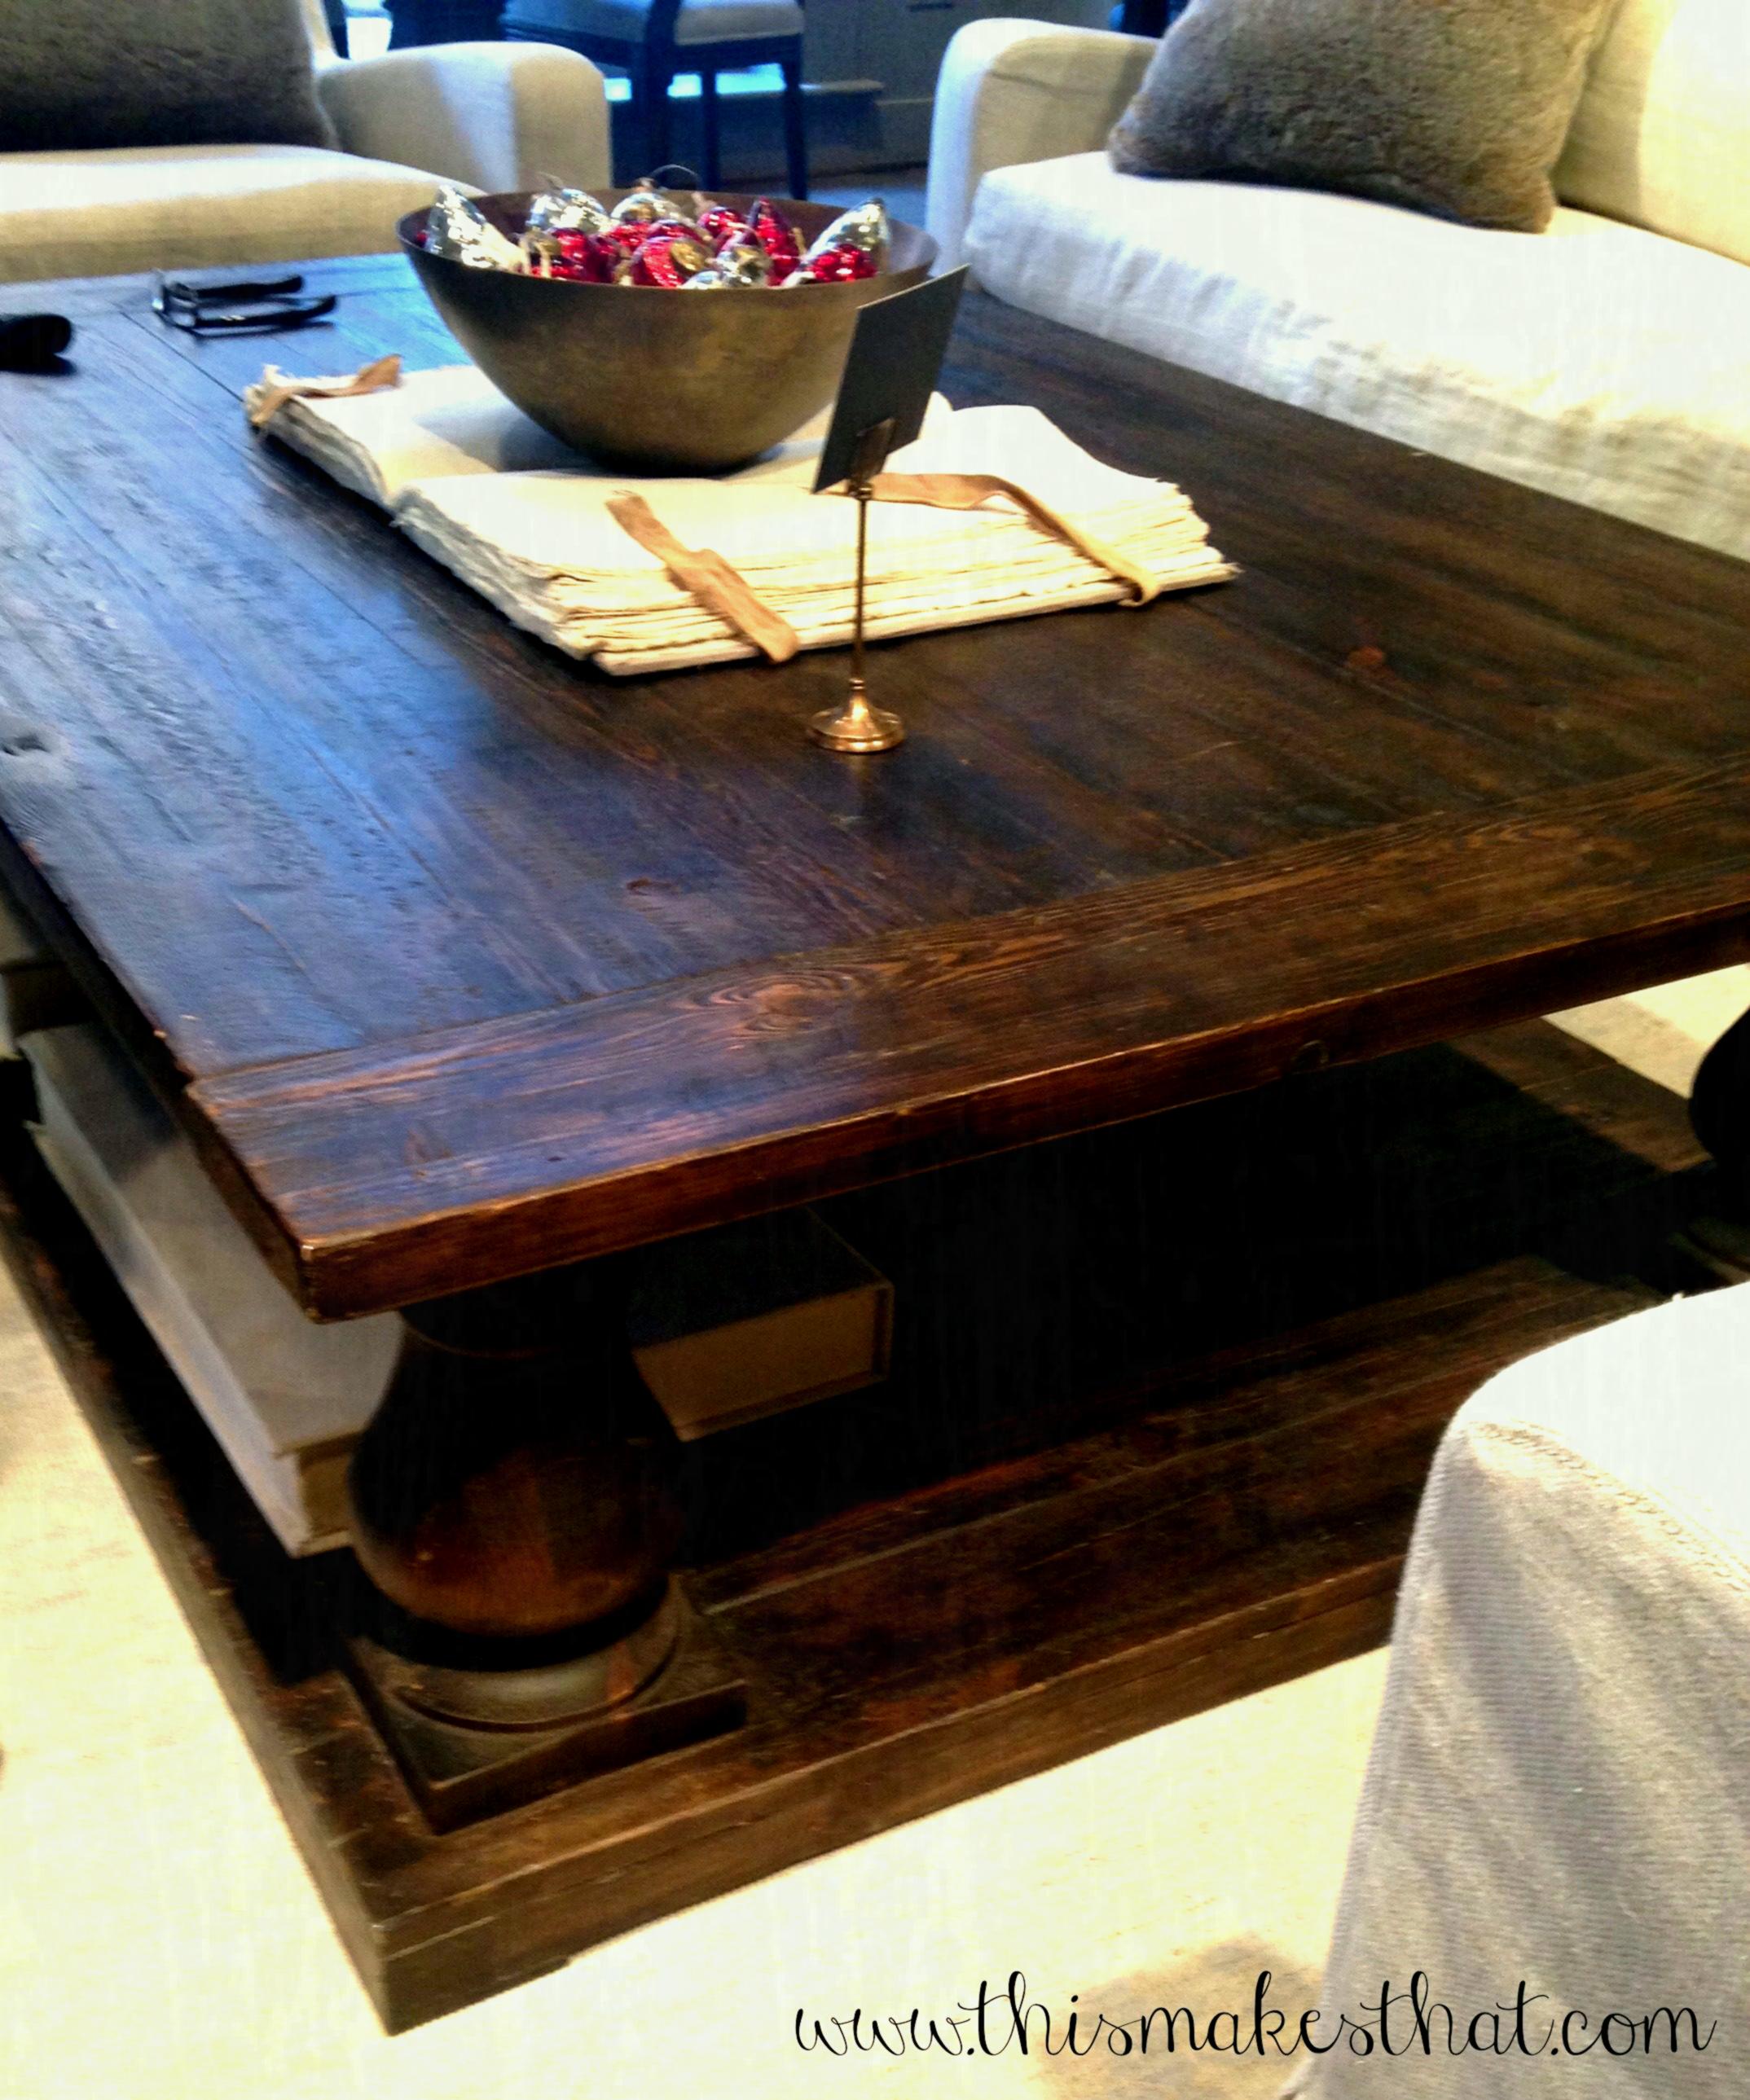 wood table design examples photo - 5